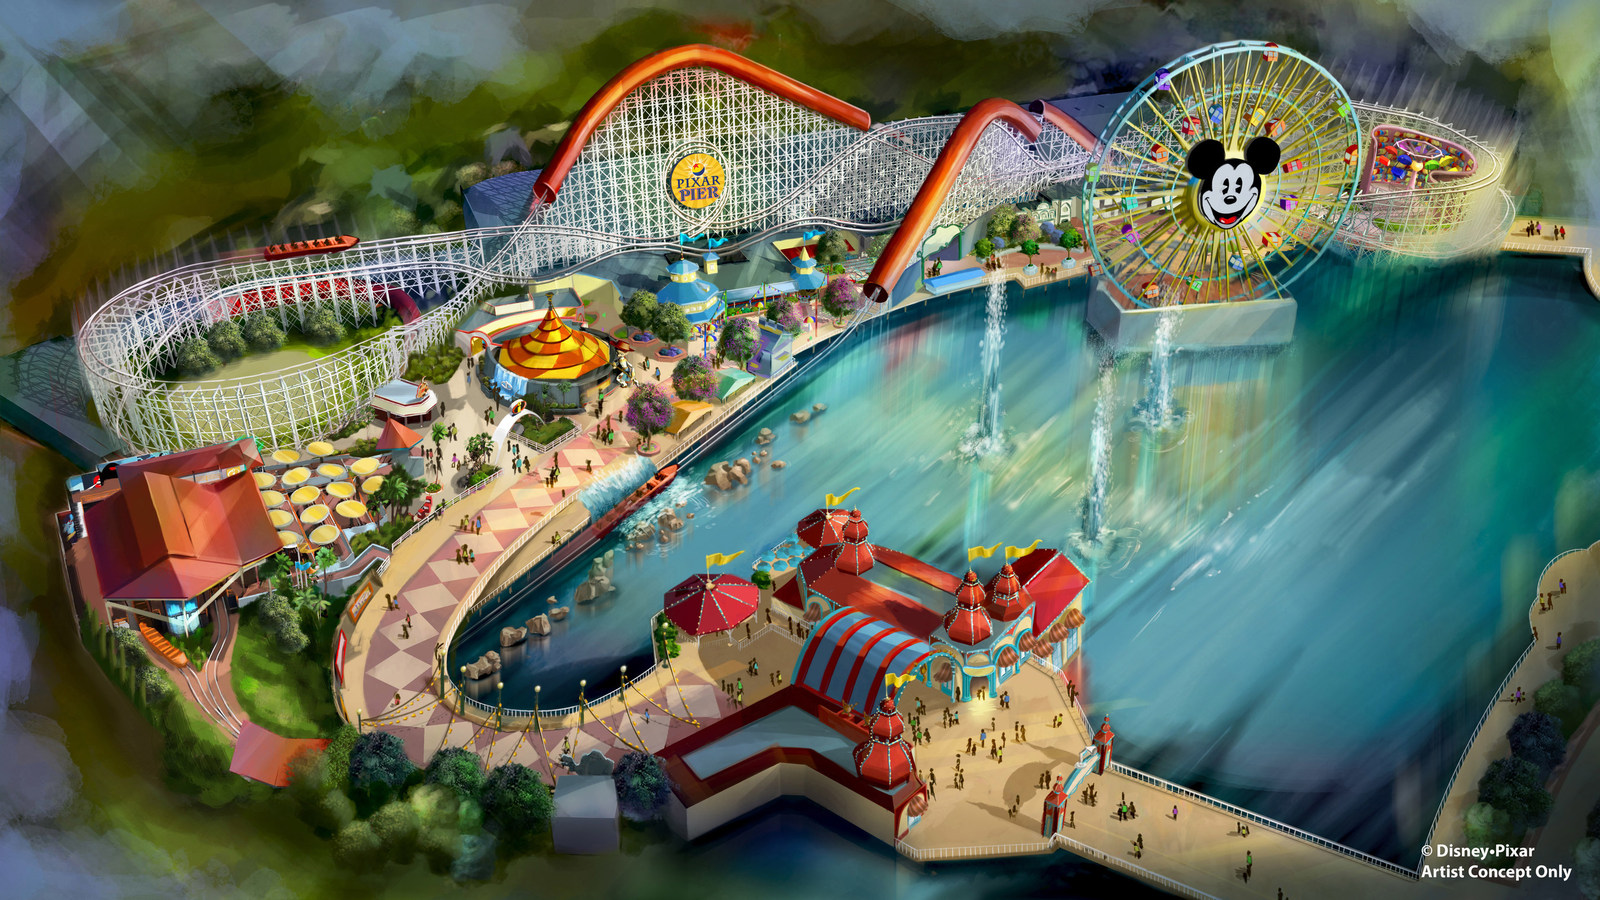 Pixar Pier Opens in Summer 2018 with New Incredicoaster, Inspired by 'The Incredibles,' at Disney California Adventure Park